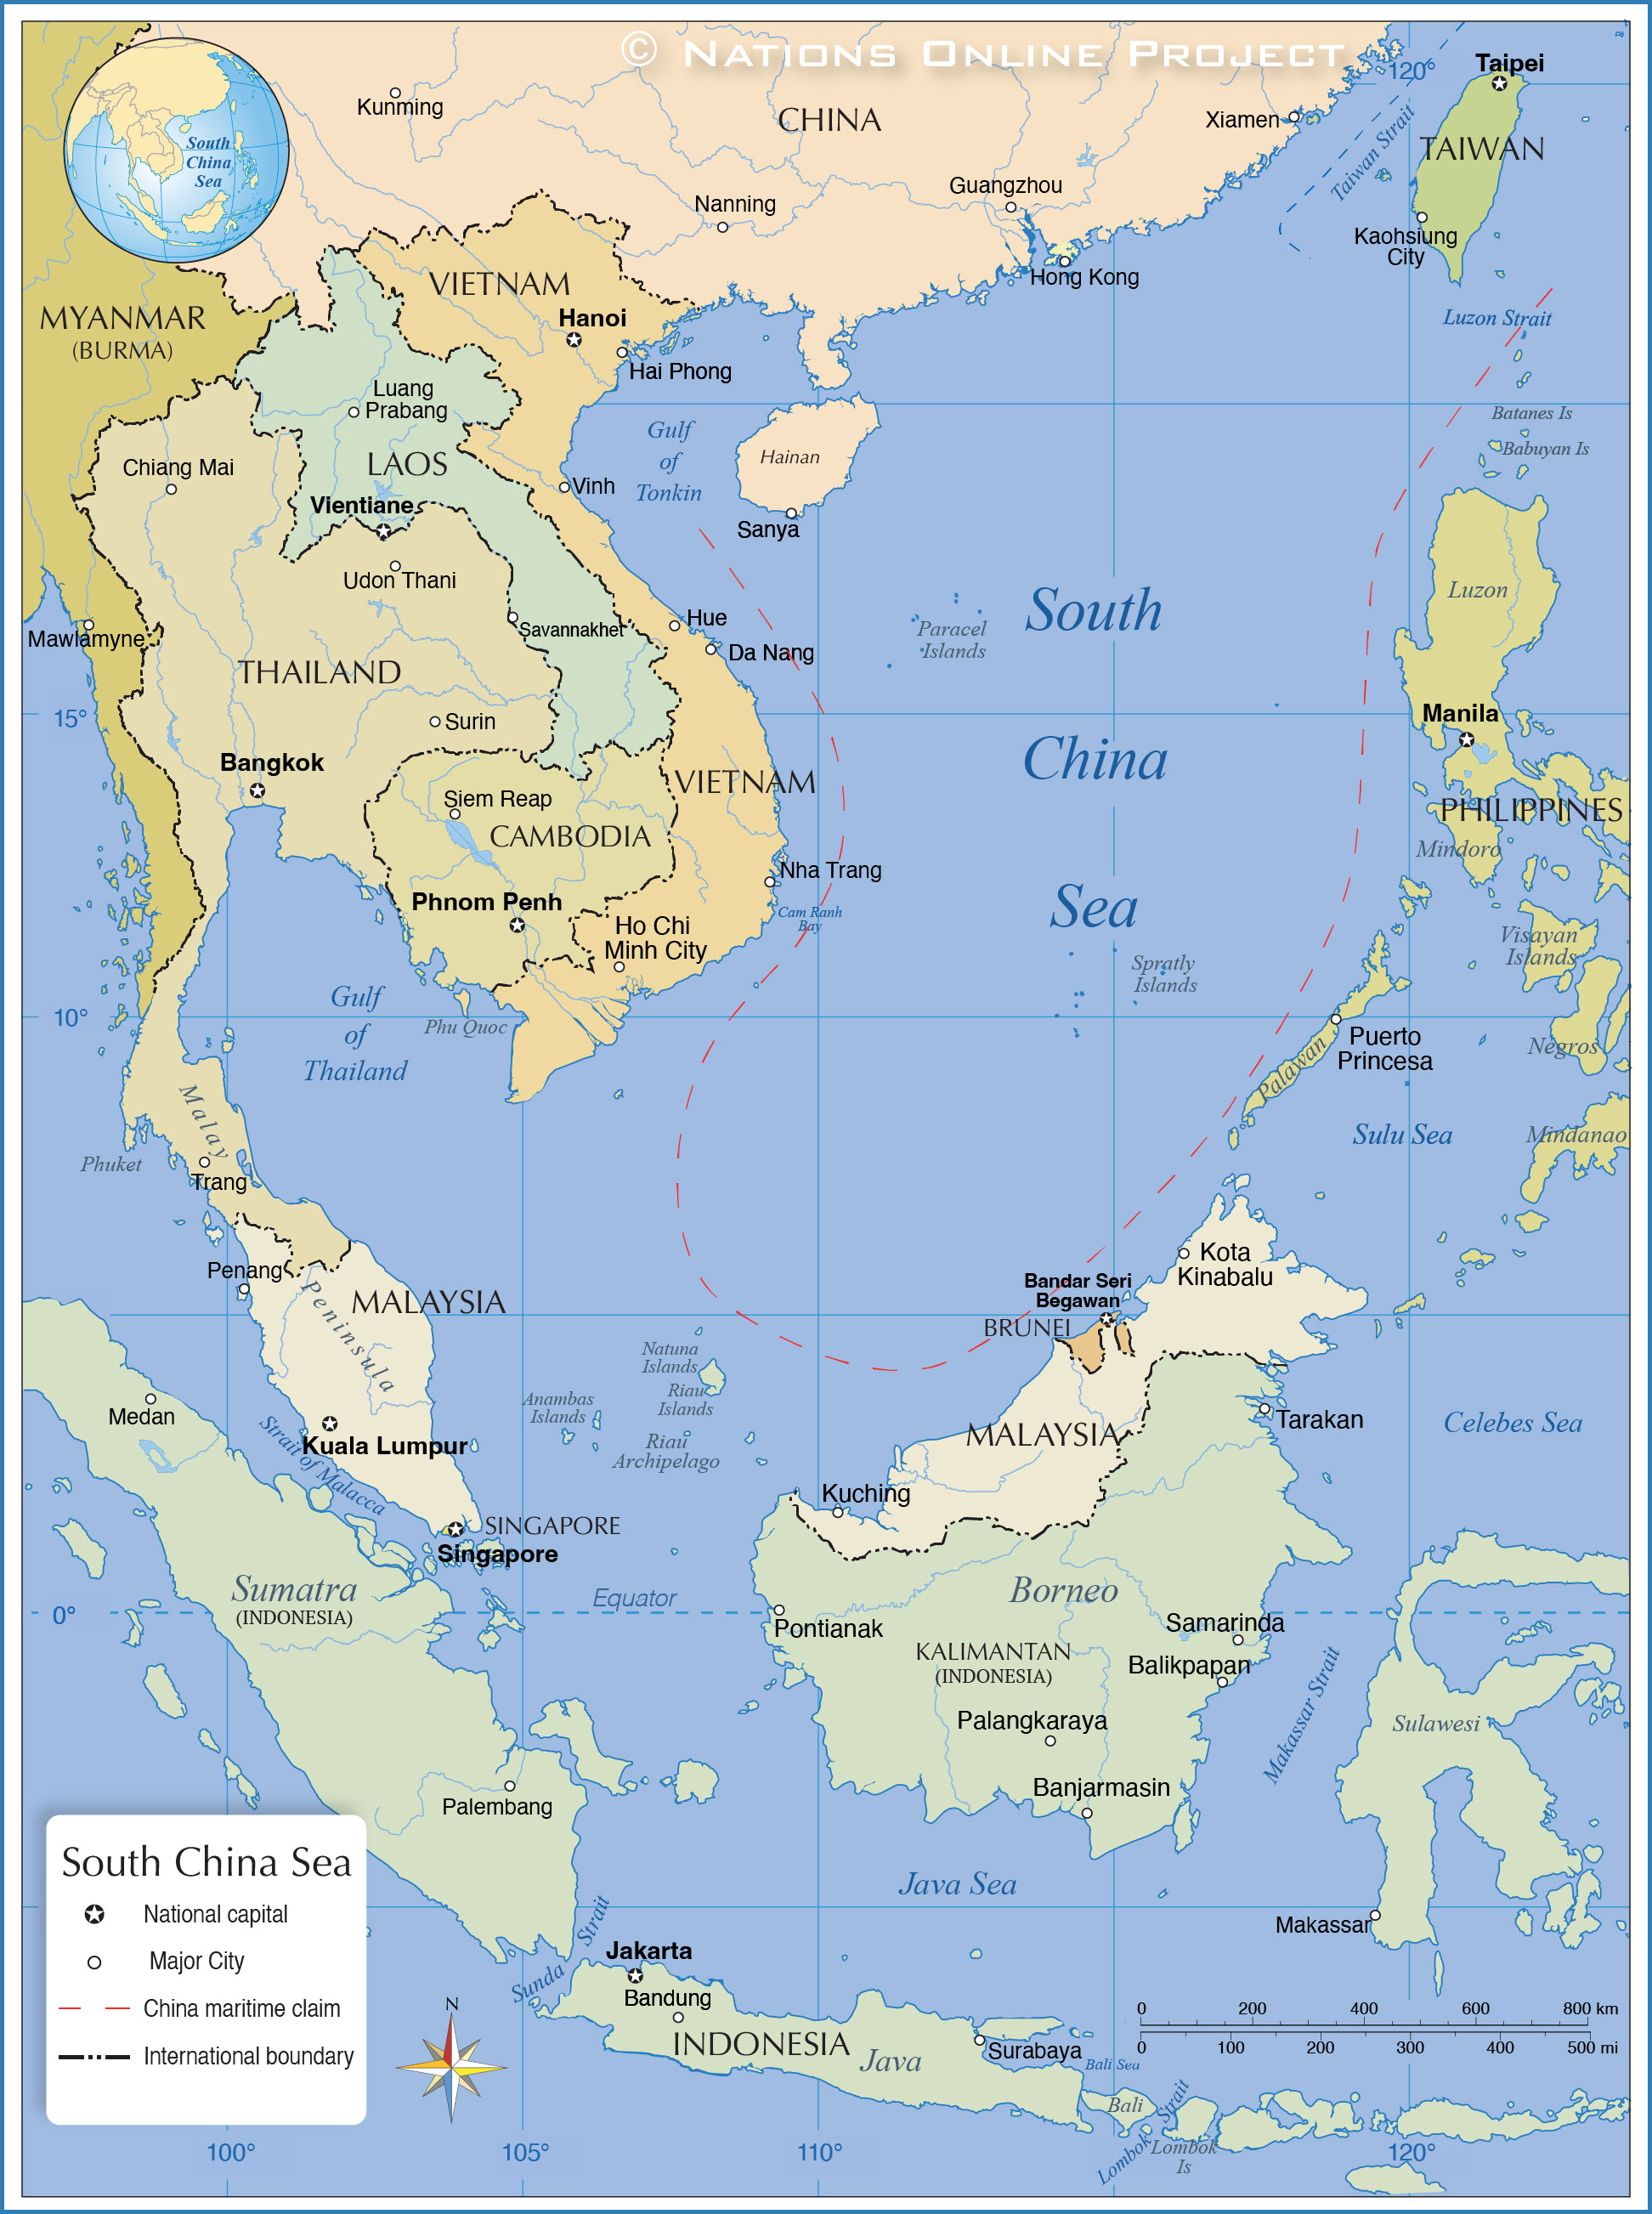 South China Sea On World Map Political Map of the South China Sea   Nations Online Project